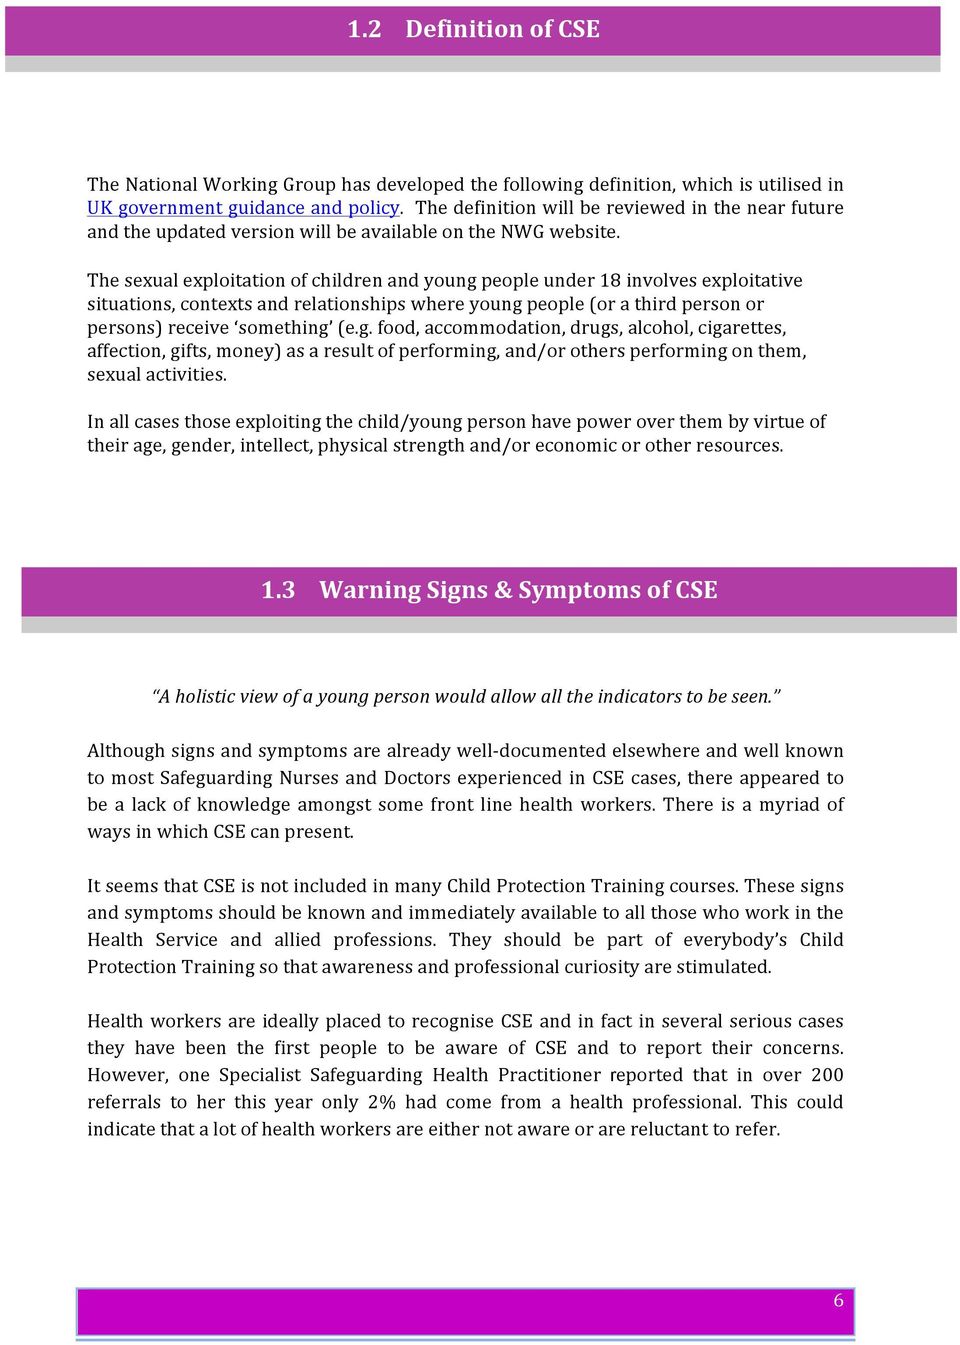 The sexual exploitation of children and young people under 18 involves exploitative situations, contexts and relationships where young people (or a third person or persons) receive something (e.g. food, accommodation, drugs, alcohol, cigarettes, affection, gifts, money) as a result of performing, and/or others performing on them, sexual activities.